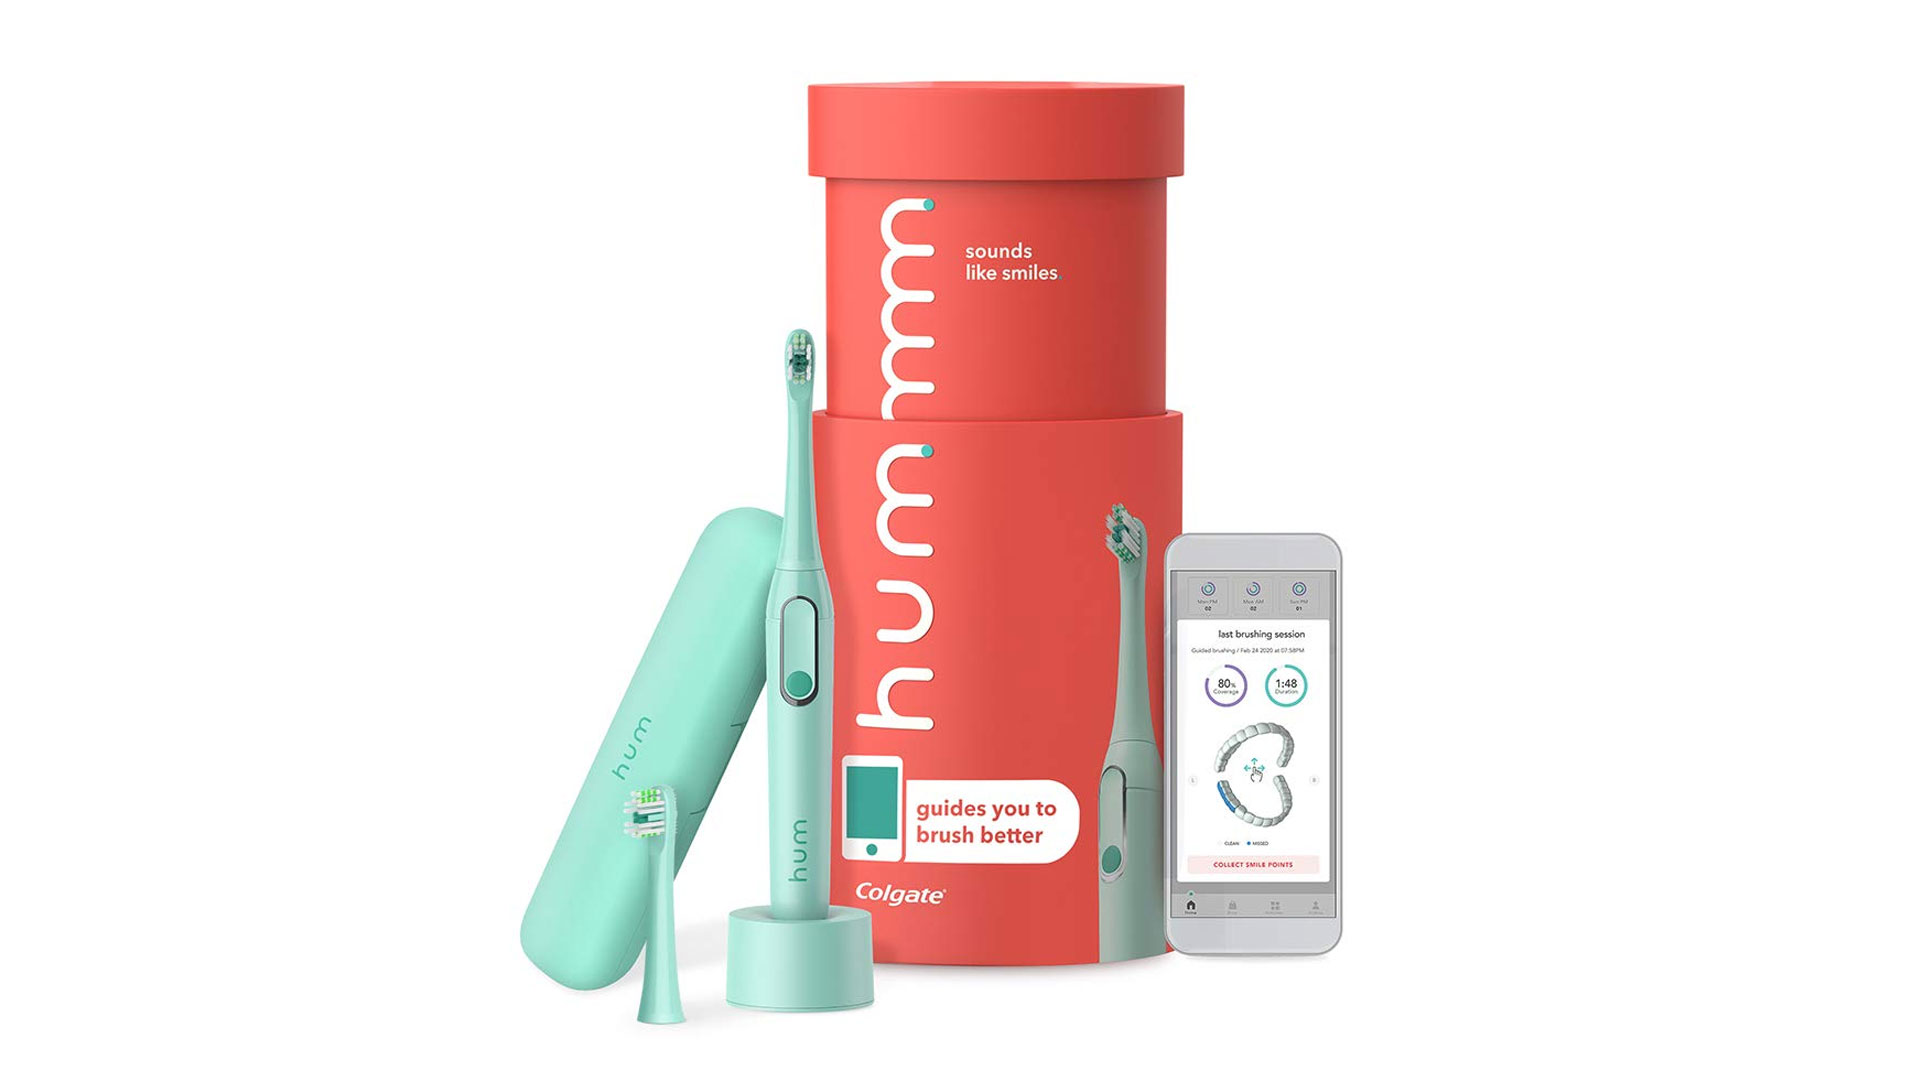 Best electric toothbrushes: image shows Hum by Colgate electric toothbrush